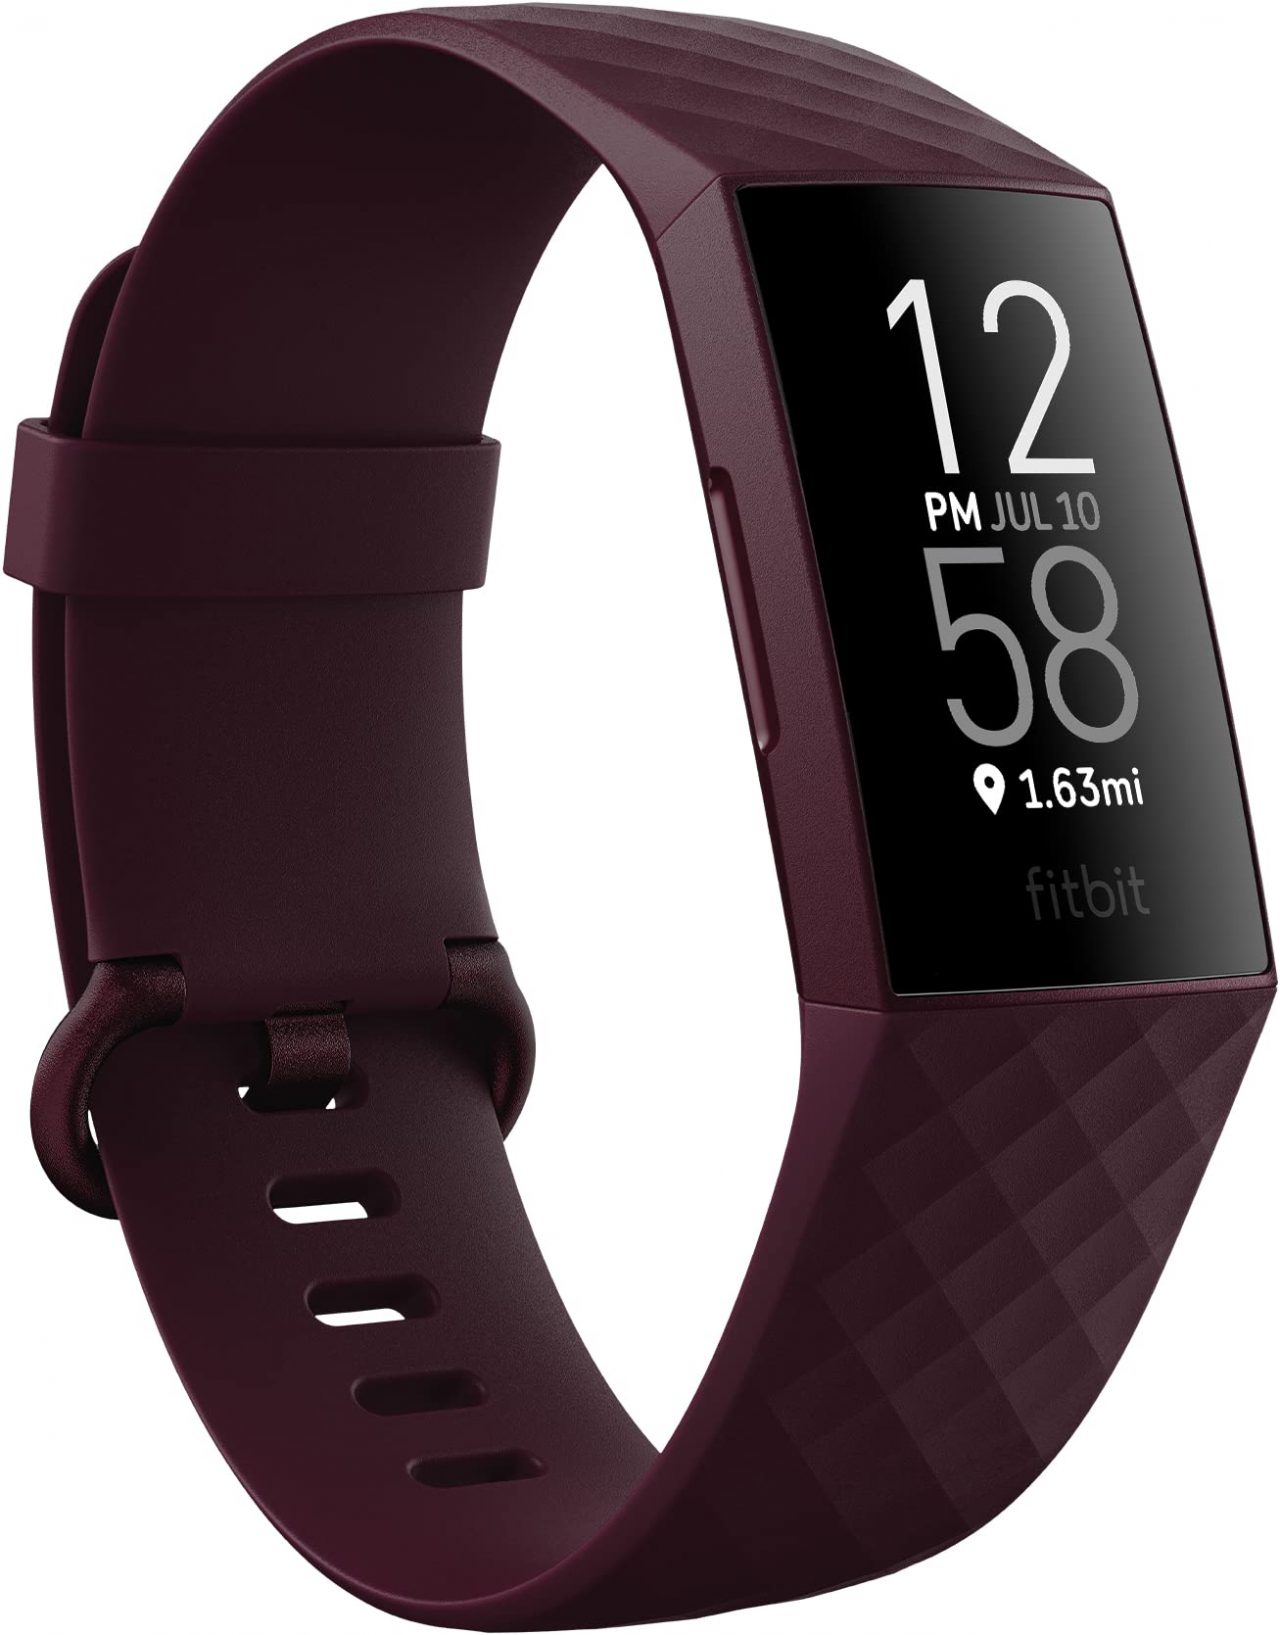 Fitbit Charge 4 Fitness and Activity Tracker with Built-in GPS, Heart